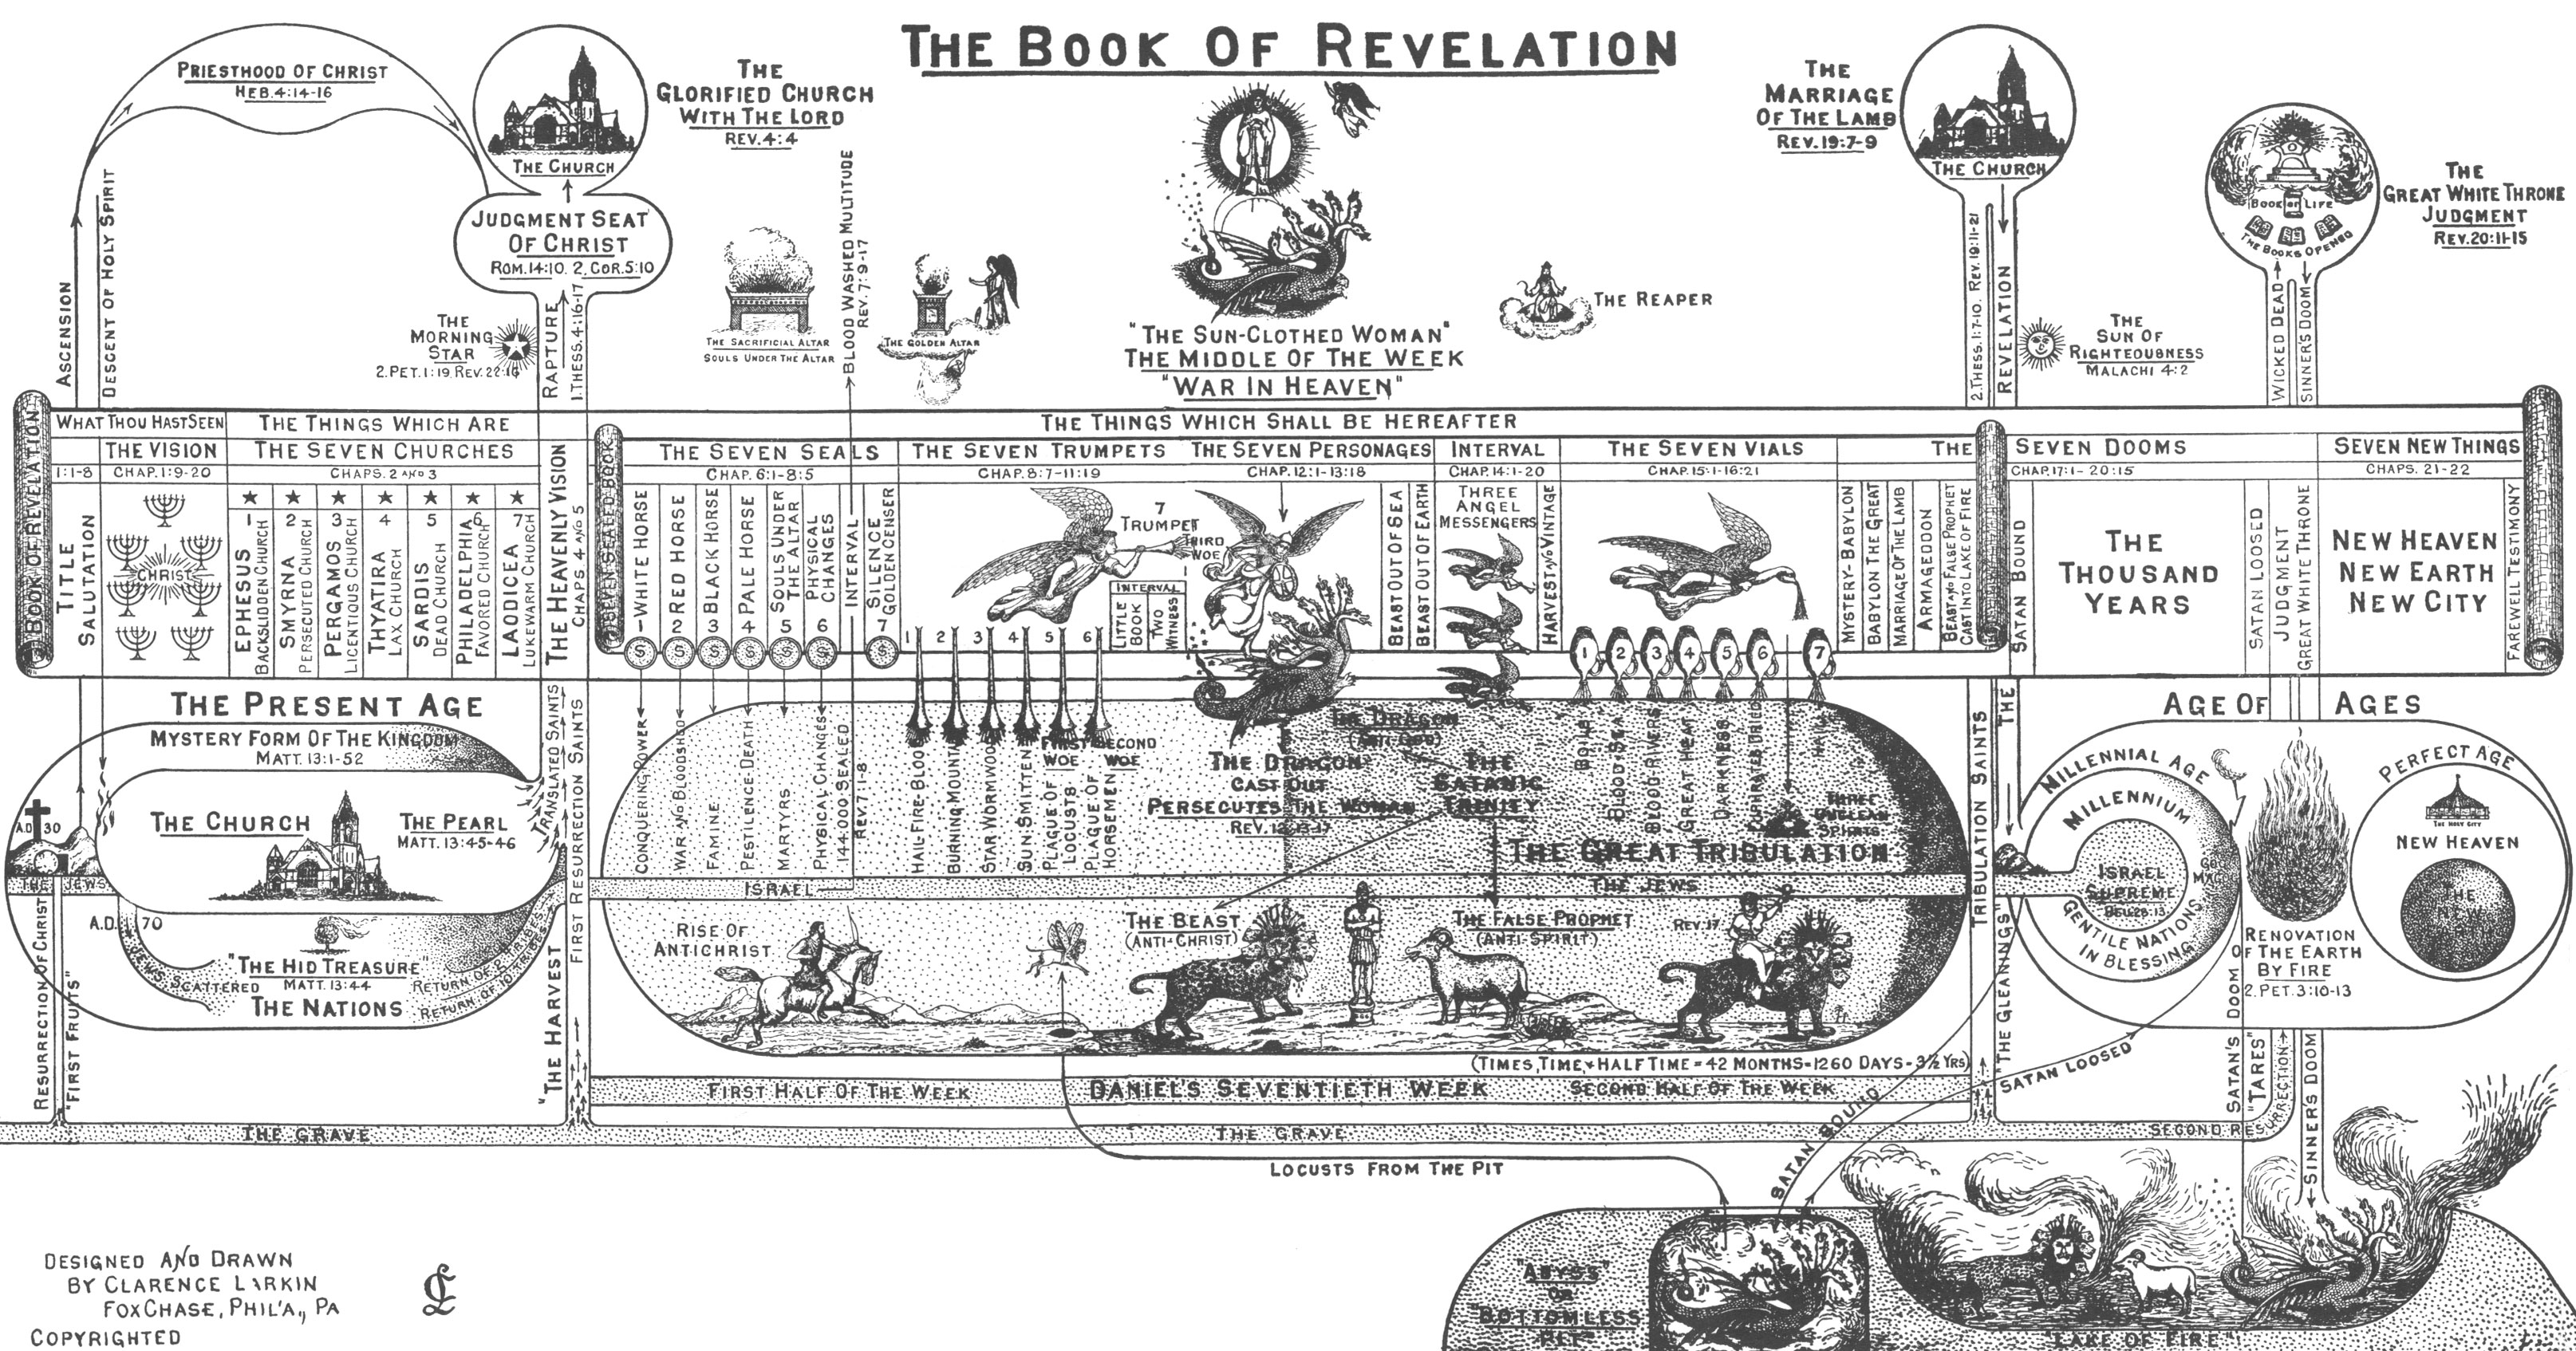 Comparison Chart Letters To The Seven Churches Of Revelation